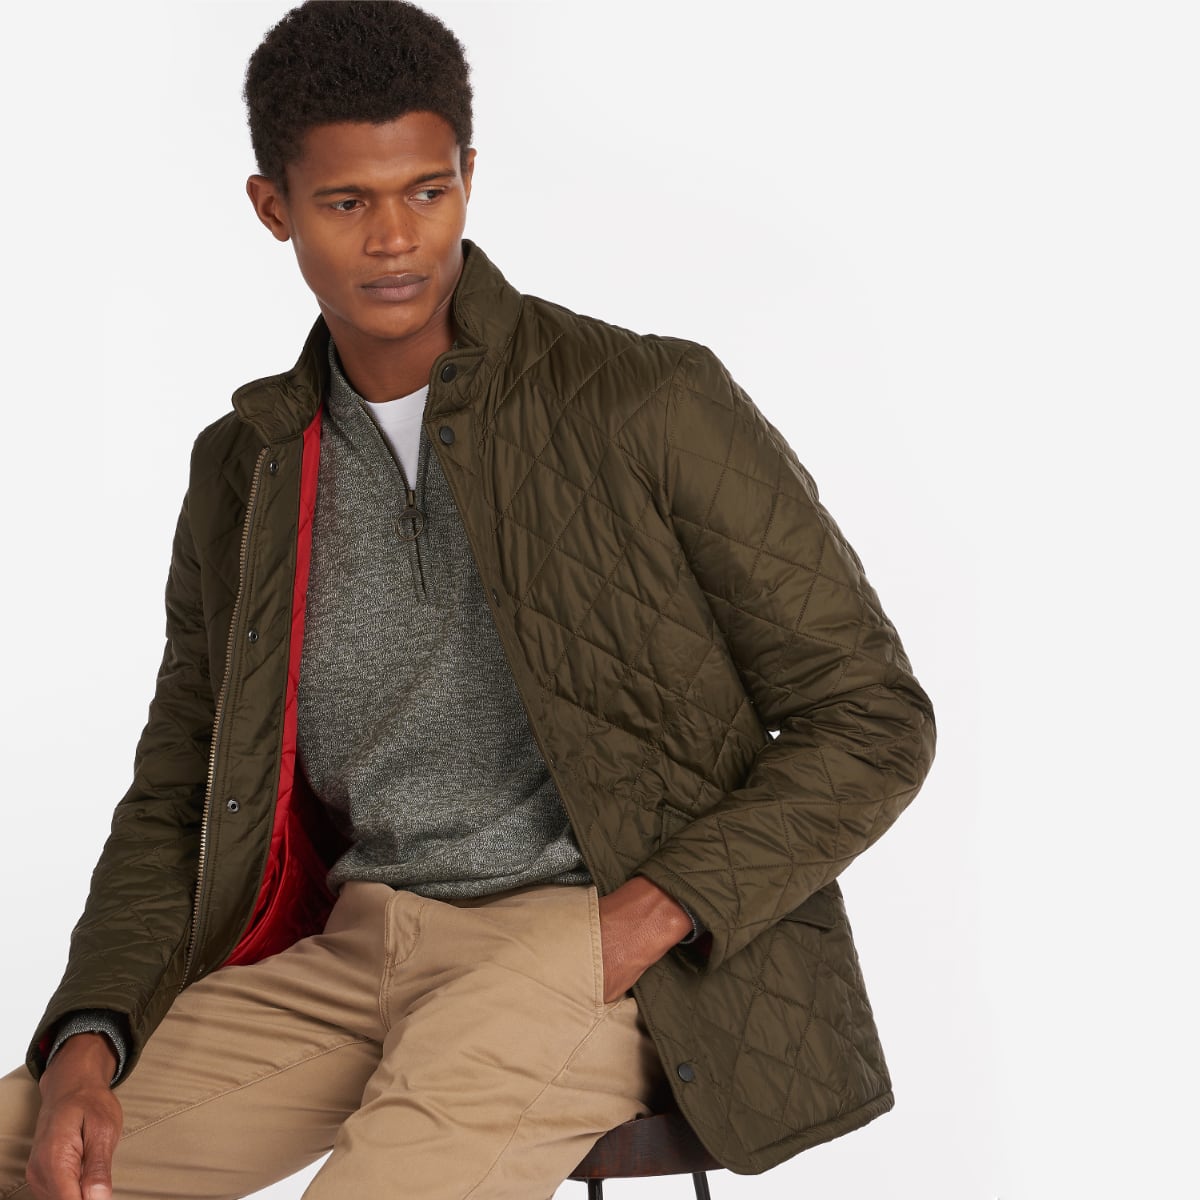 Barbour Flyweight Chelsea Quilted Men's Jacket | Olive